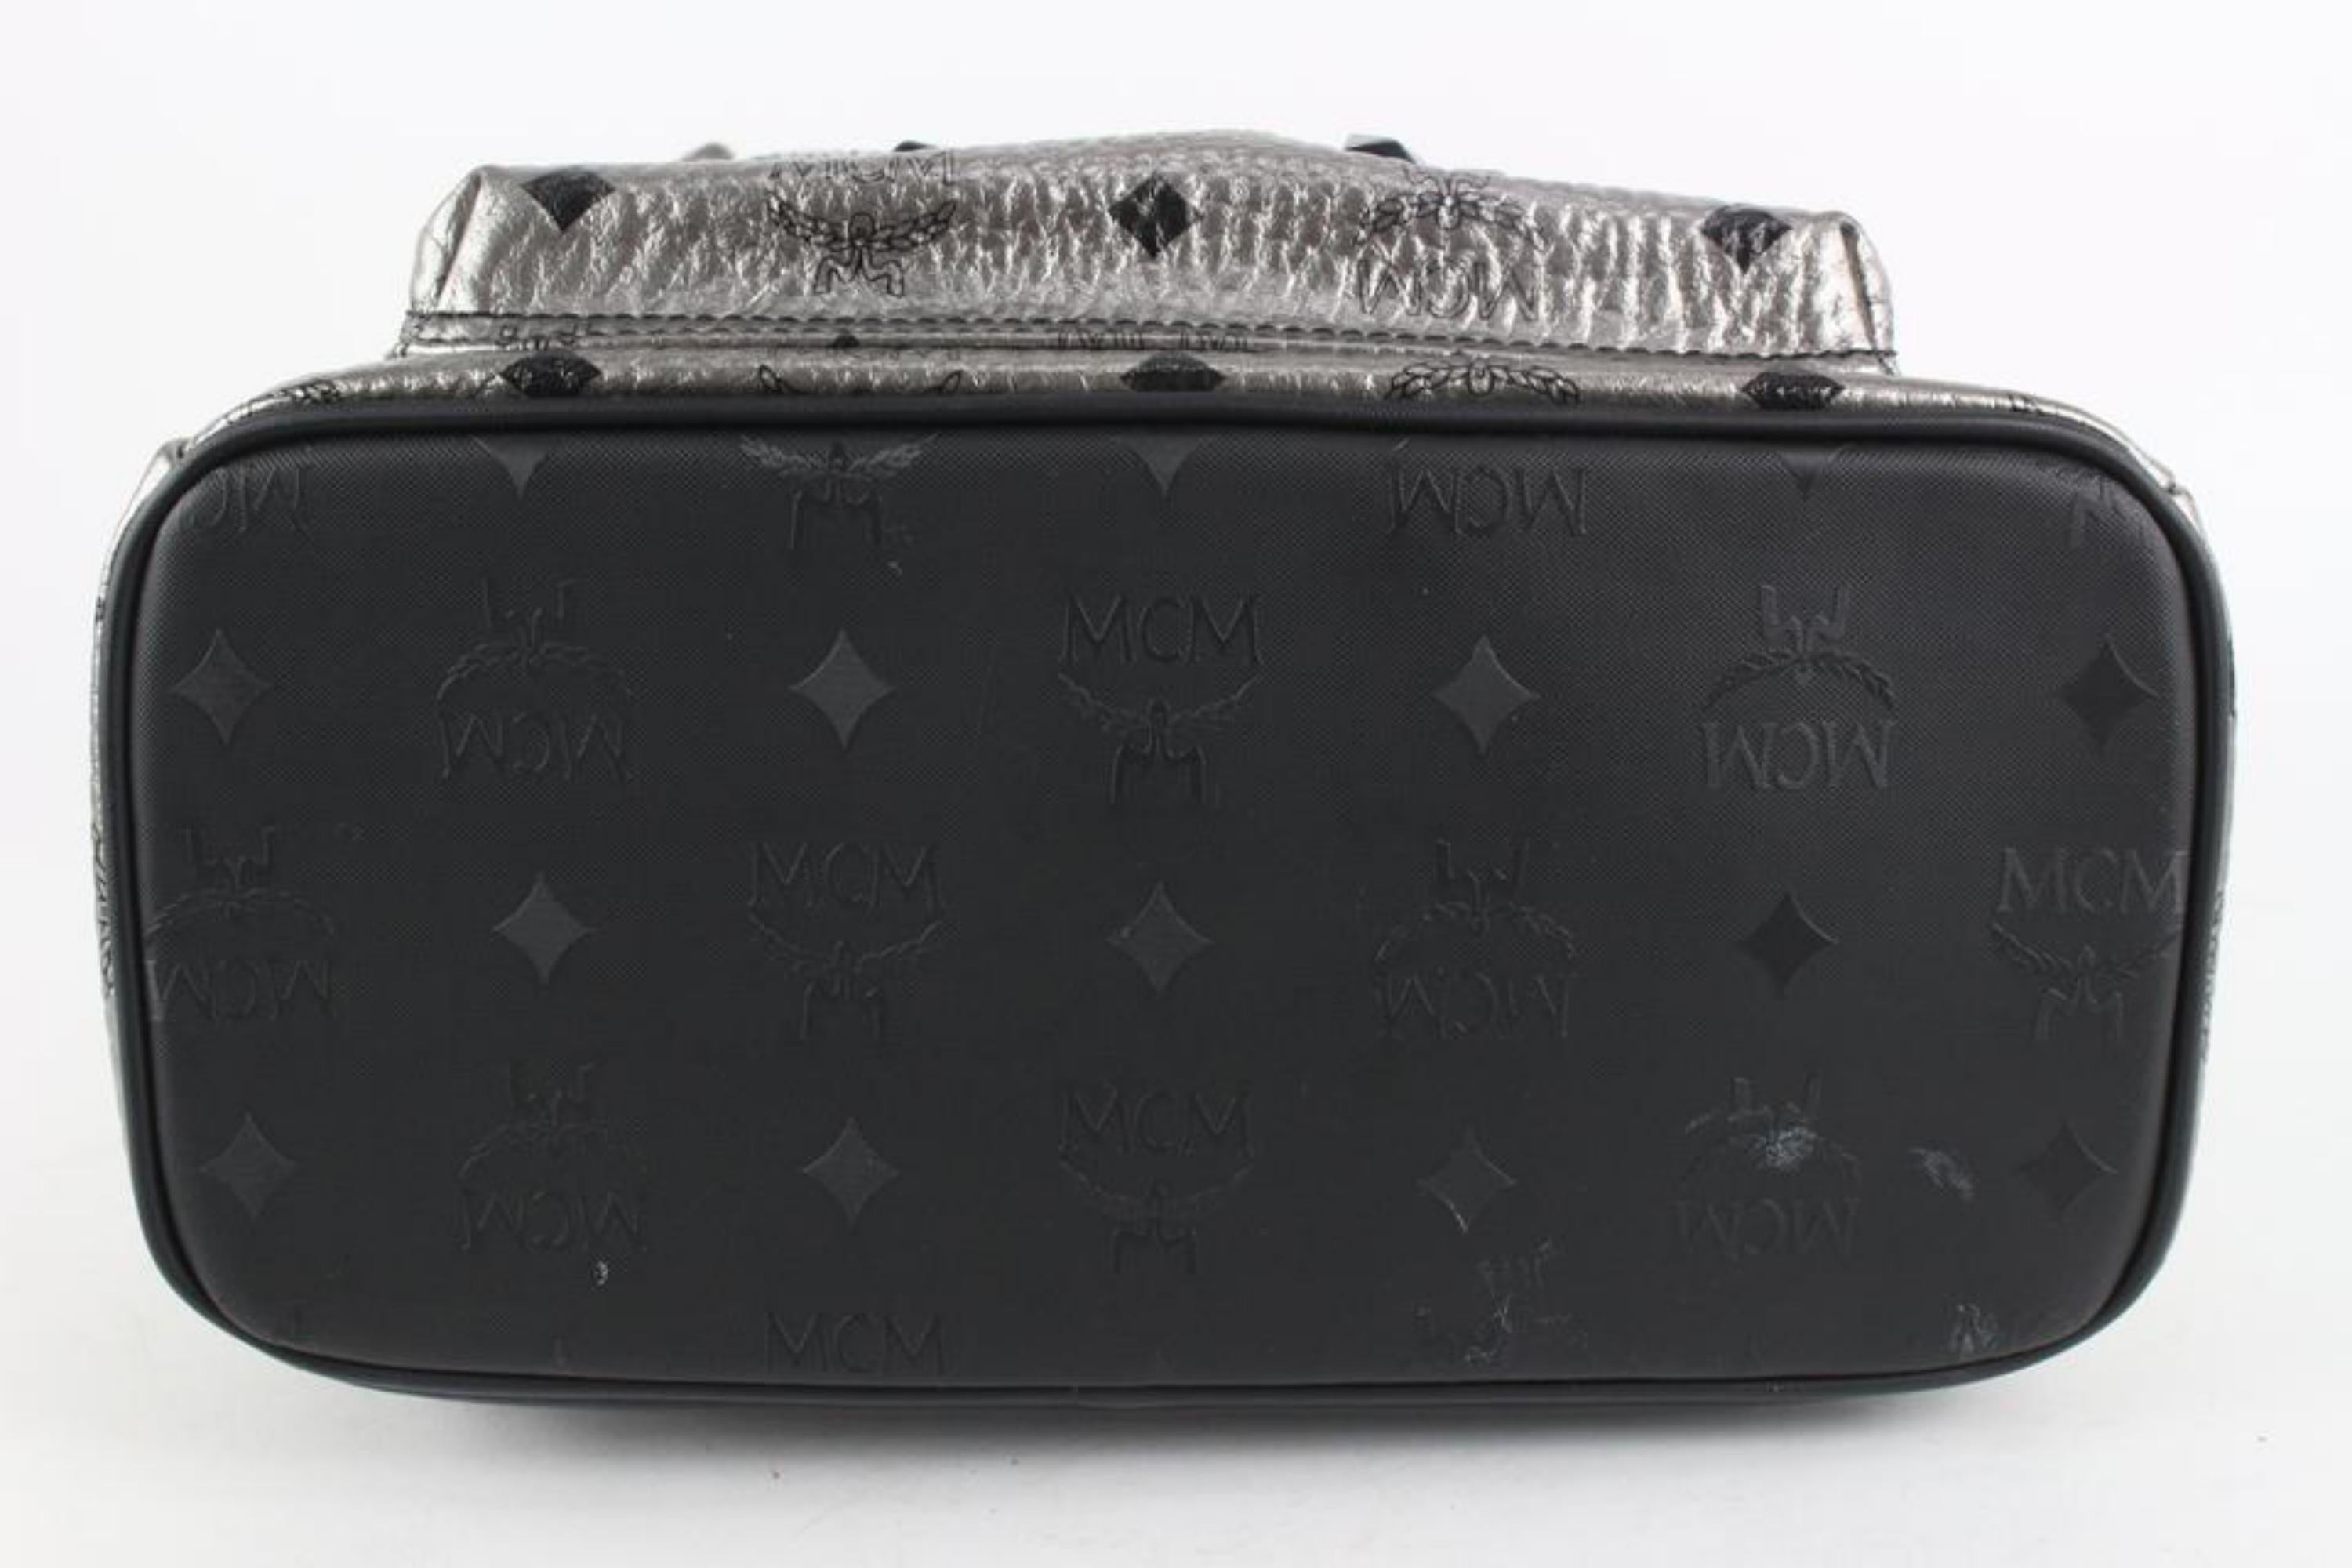 MCM Metallic Silver Monogram Visetos Studded Small Stark Stud Backpa 115m19 In Good Condition For Sale In Dix hills, NY